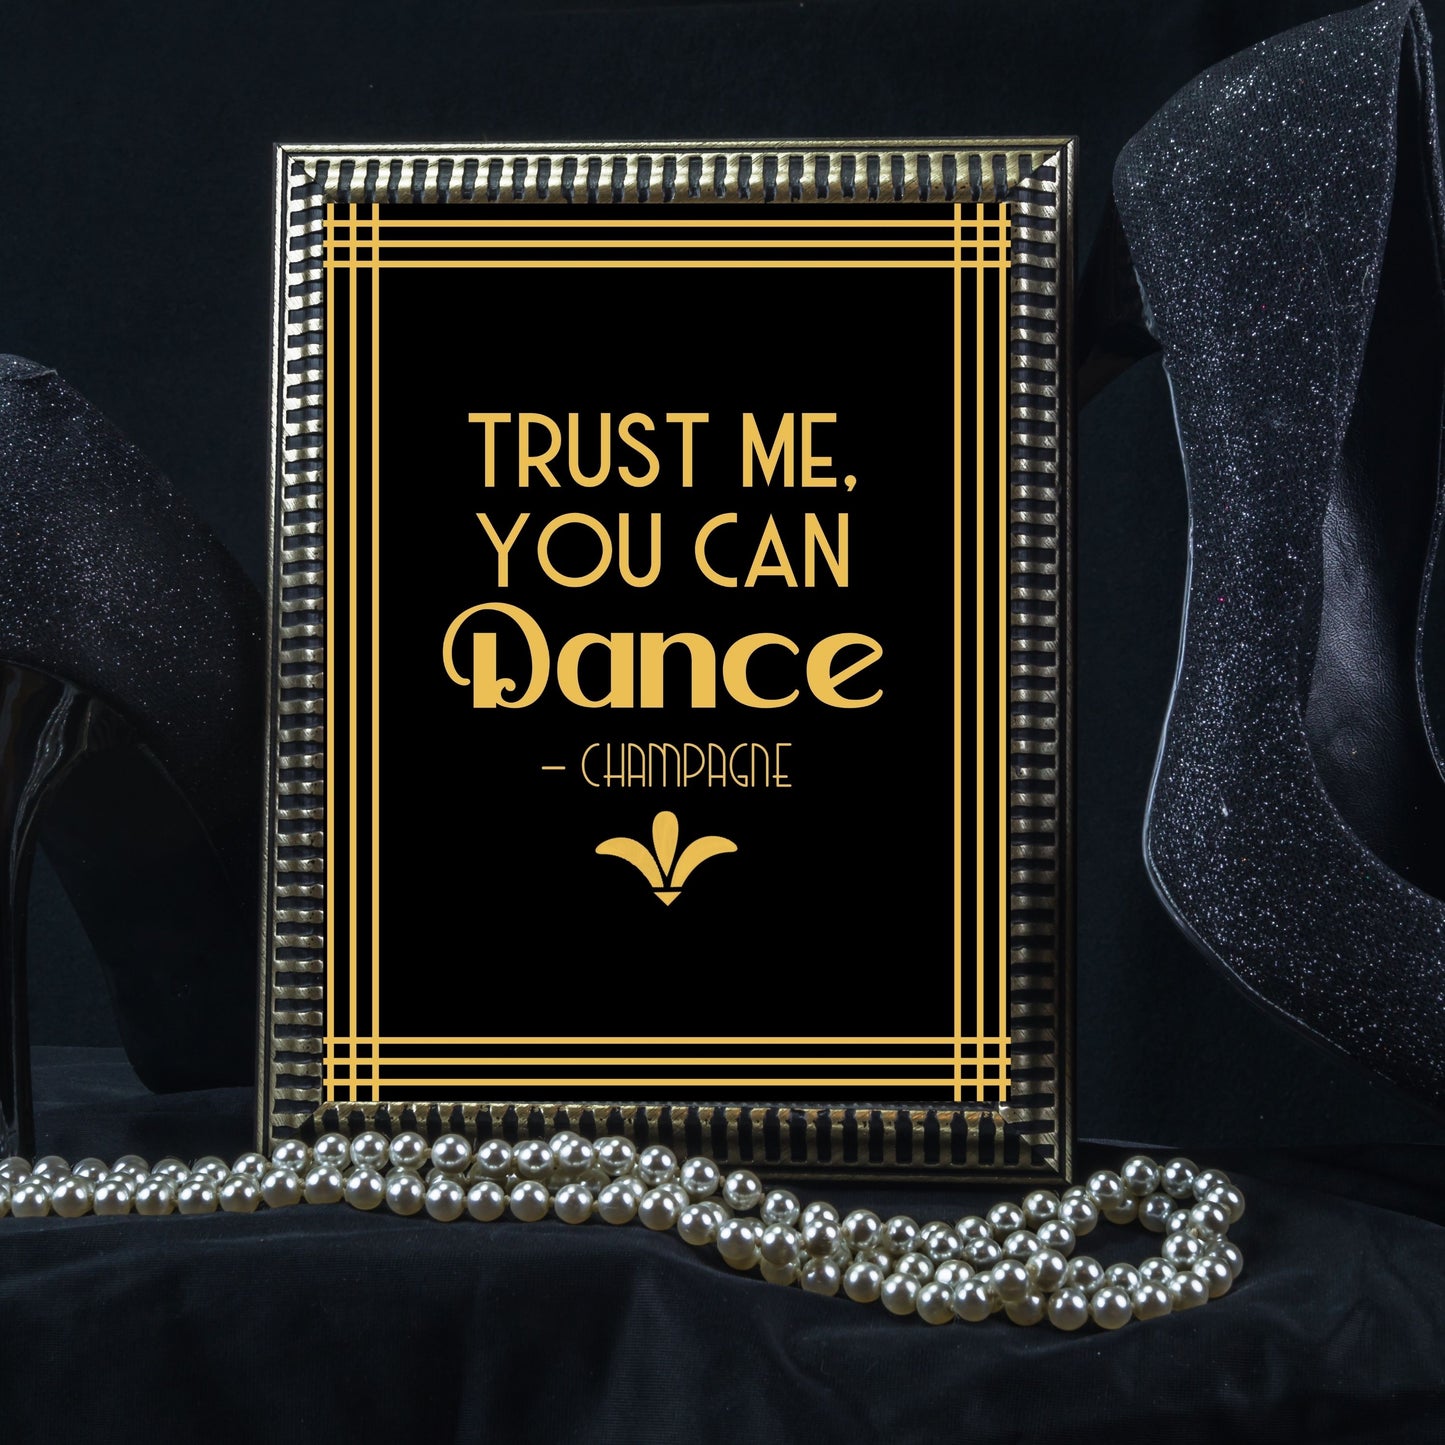 "Trust Me You Can Dance -Champagne" Printable Party Sign For Great Gatsby or Roaring 20's Party Or Wedding,  Black & Gold, Printable Party Decor